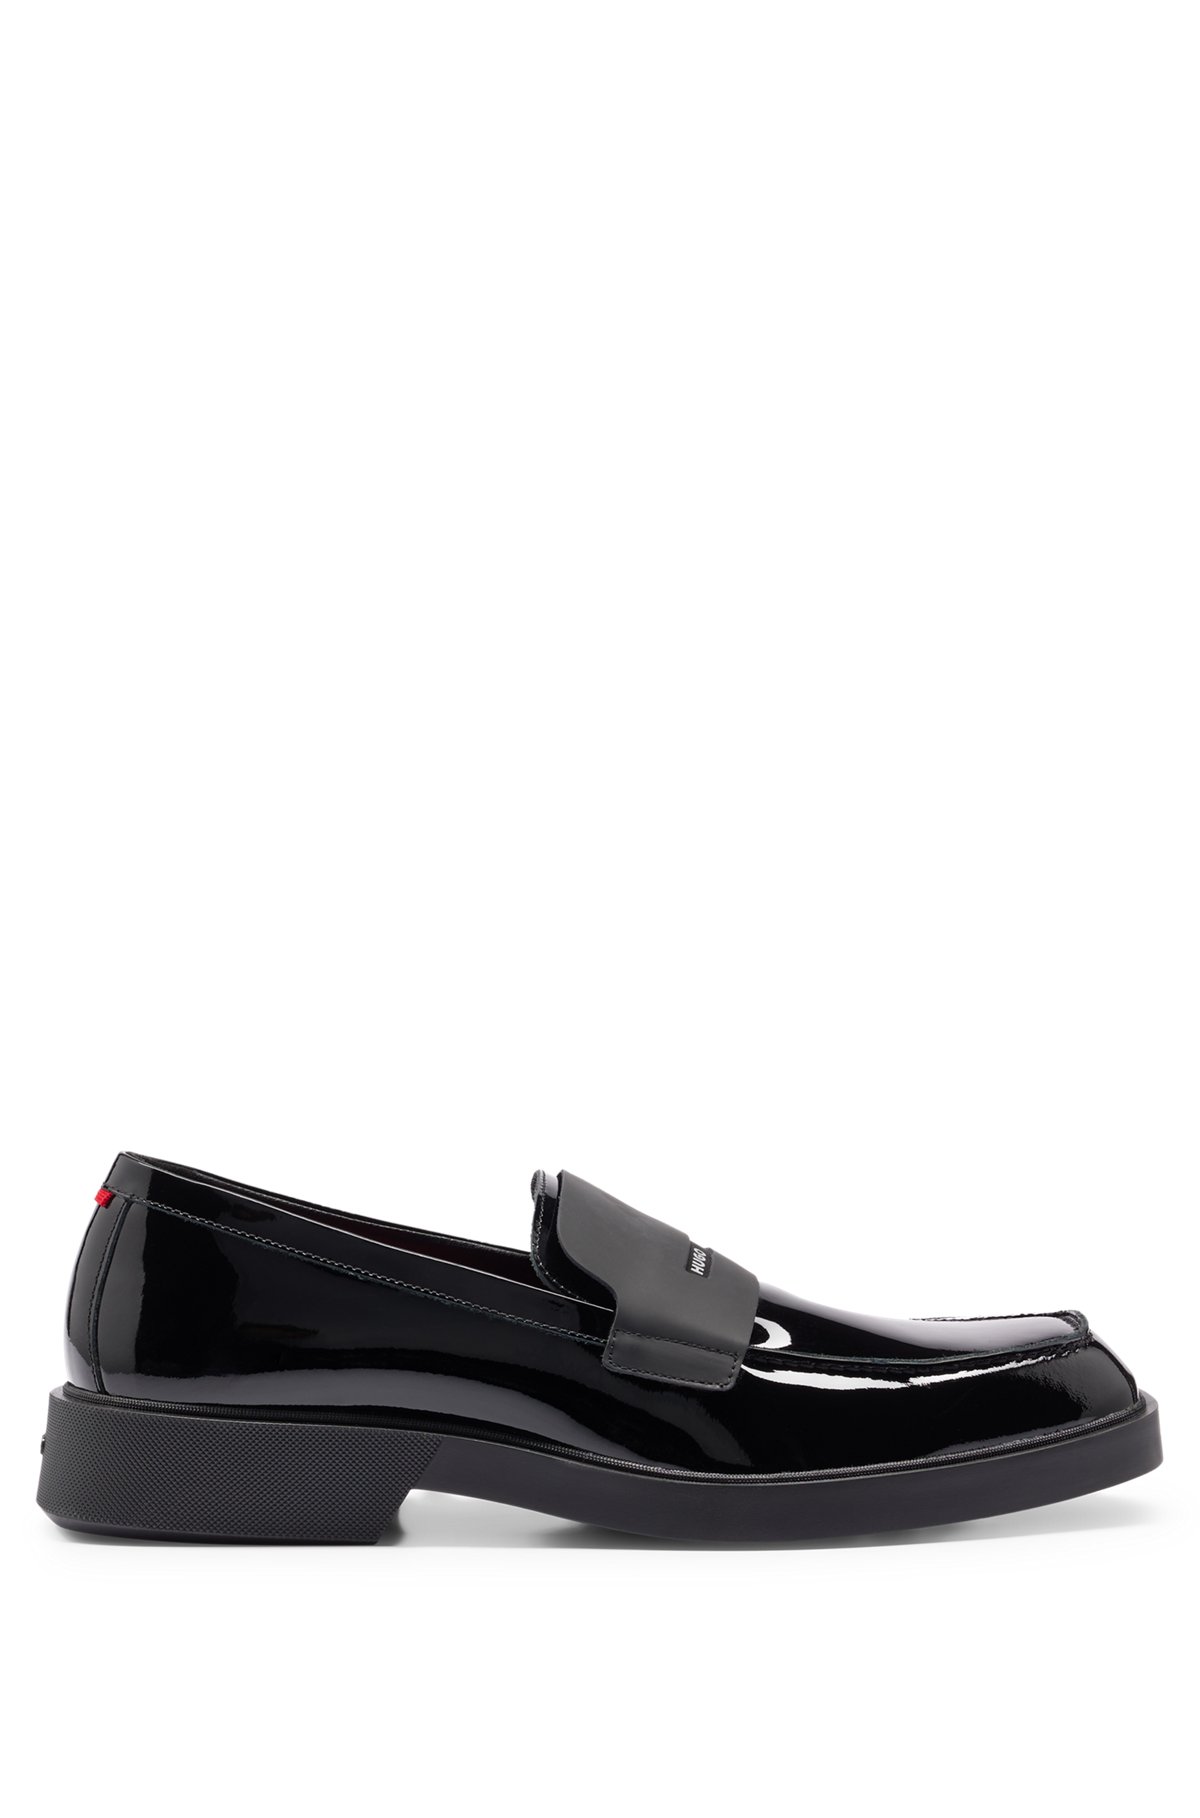 Patent-leather moccasins with branded penny trim, Black